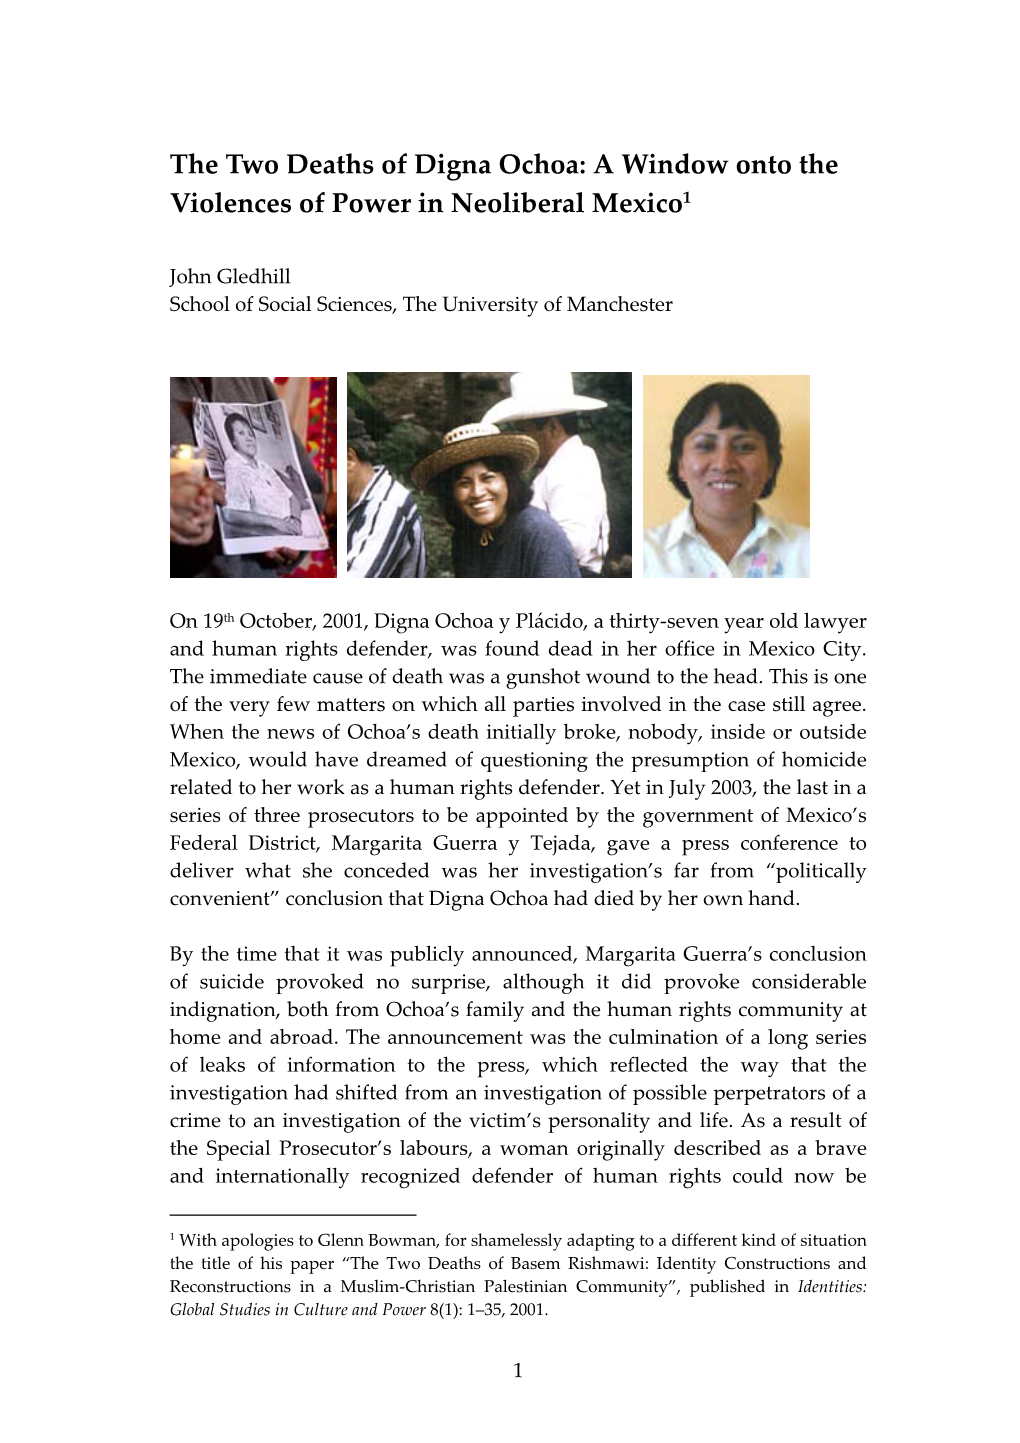 The Two Deaths of Digna Ochoa: a Window Onto the Violences of Power in Neoliberal Mexico1